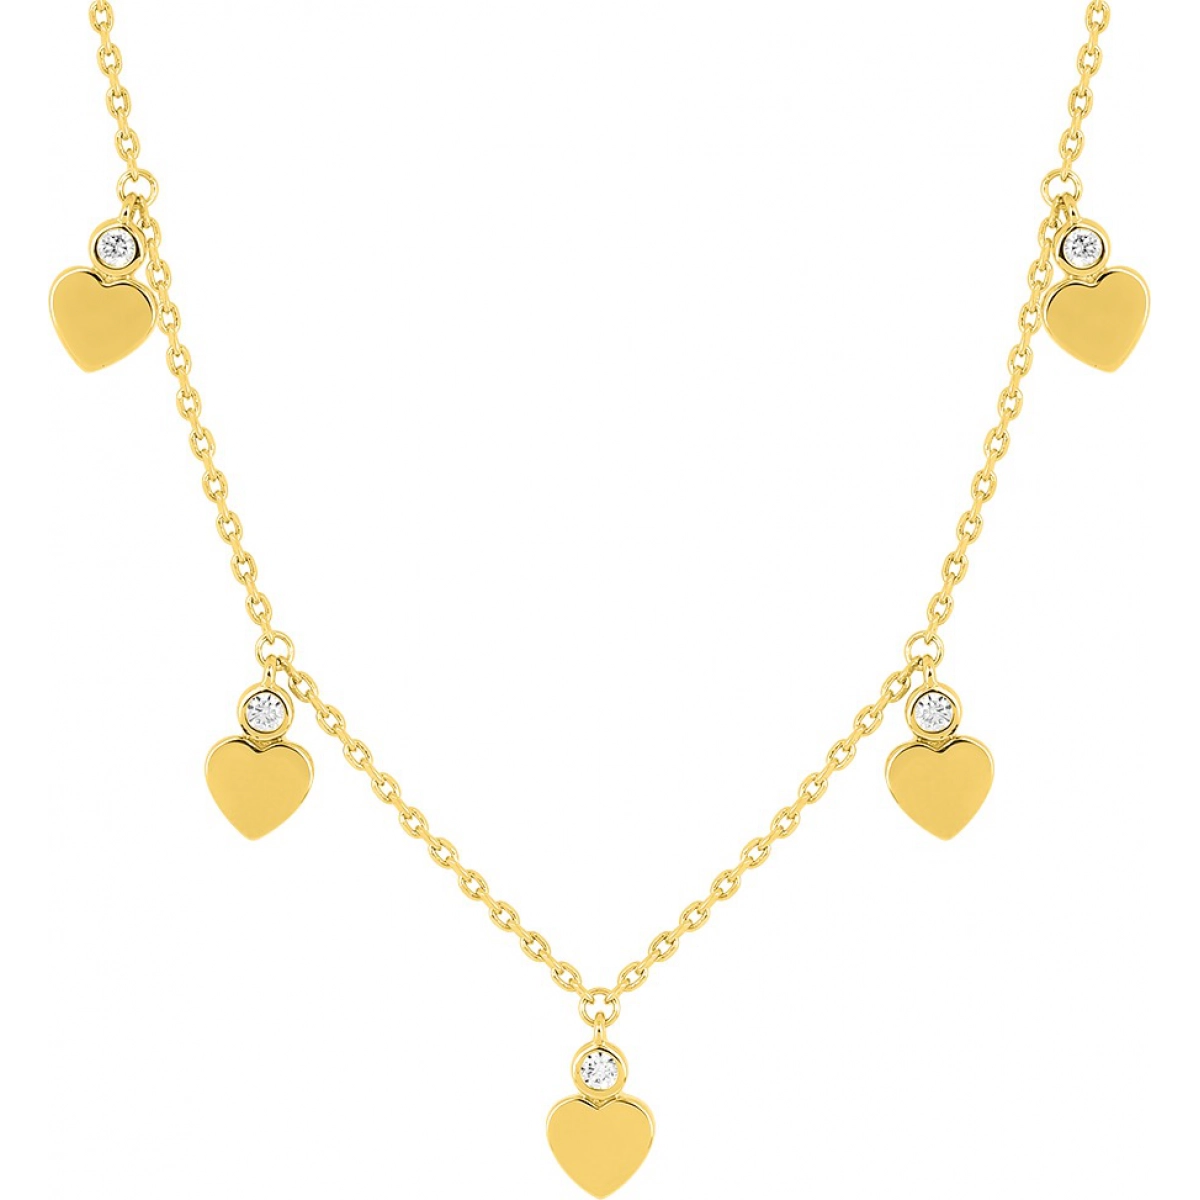 Necklace gold plated Brass Lua Blanca  255903.9 